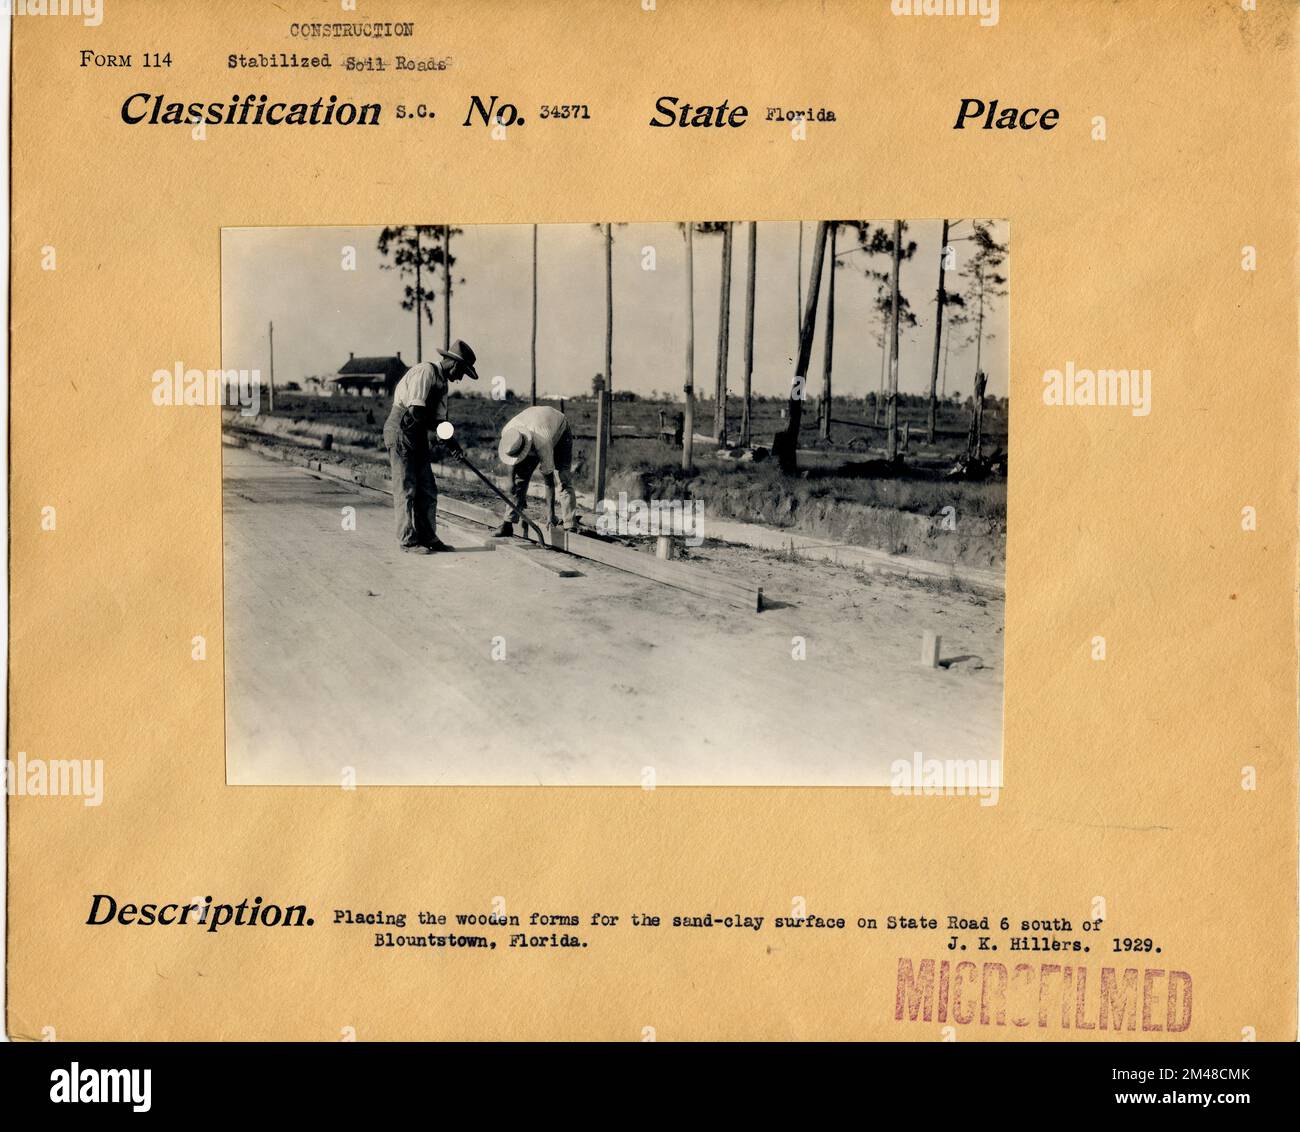 Sand-clay surface on State Road 6, south of Blountstown, Florida. Original caption: Placing the wooden forms for the sand-clay surface on State Road 6 south of Blountstown, Florida. J. K. Hillers. 1929. State: Florida. Place: Blountstown. Stock Photo